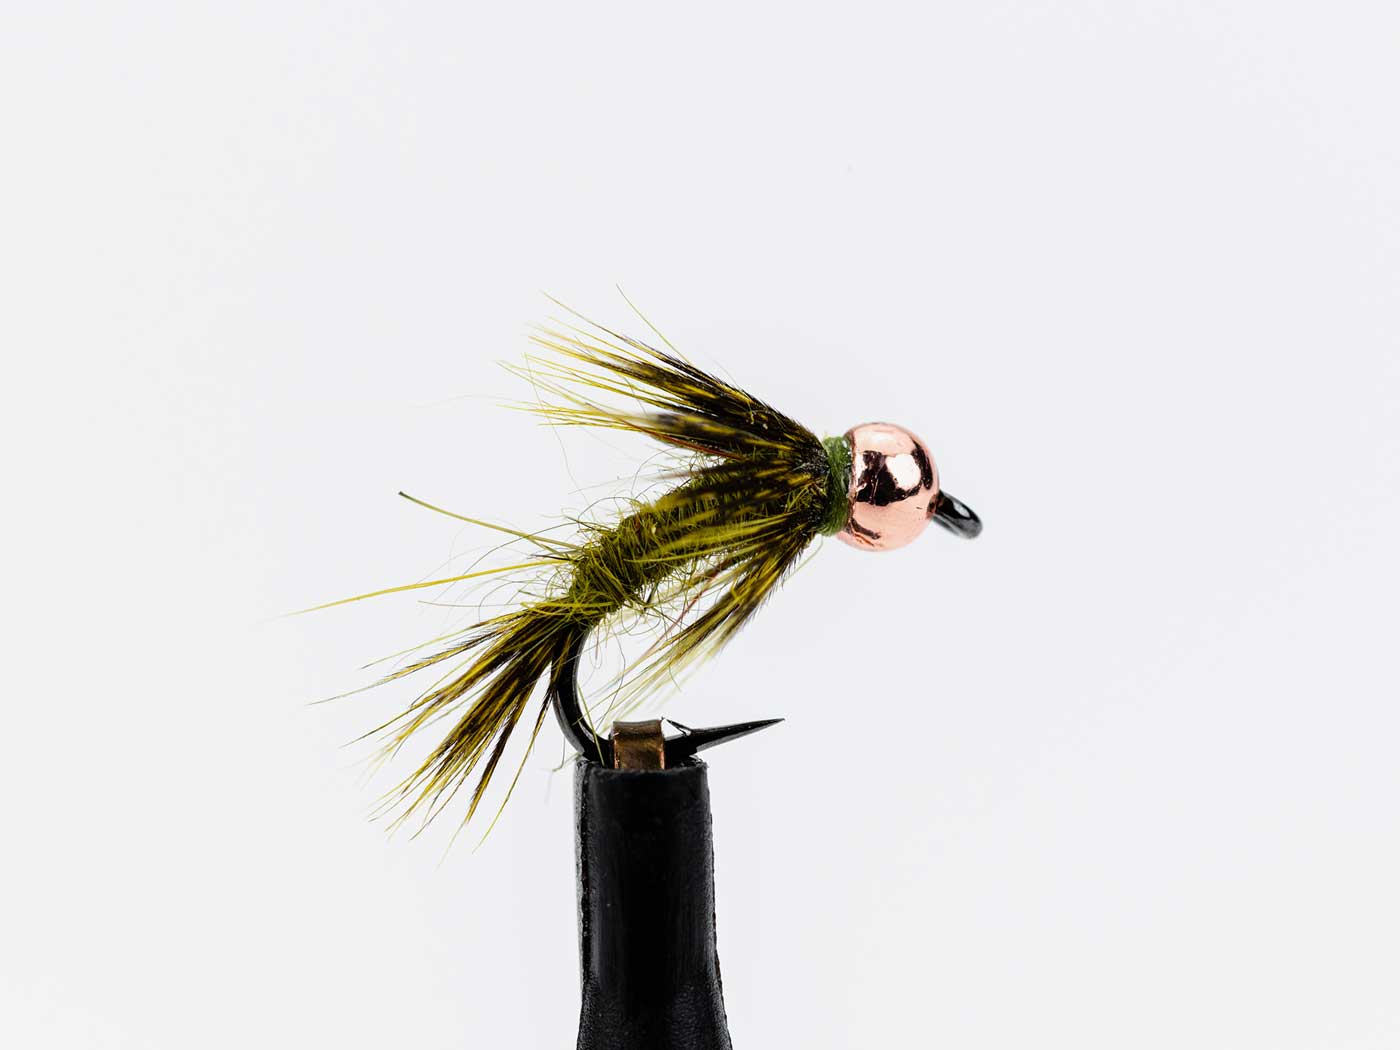 Fly Fishing Flies by Colorado Fly Supply - Soft Hackle Hare's Ear Nymph -  Best Trout Flies to